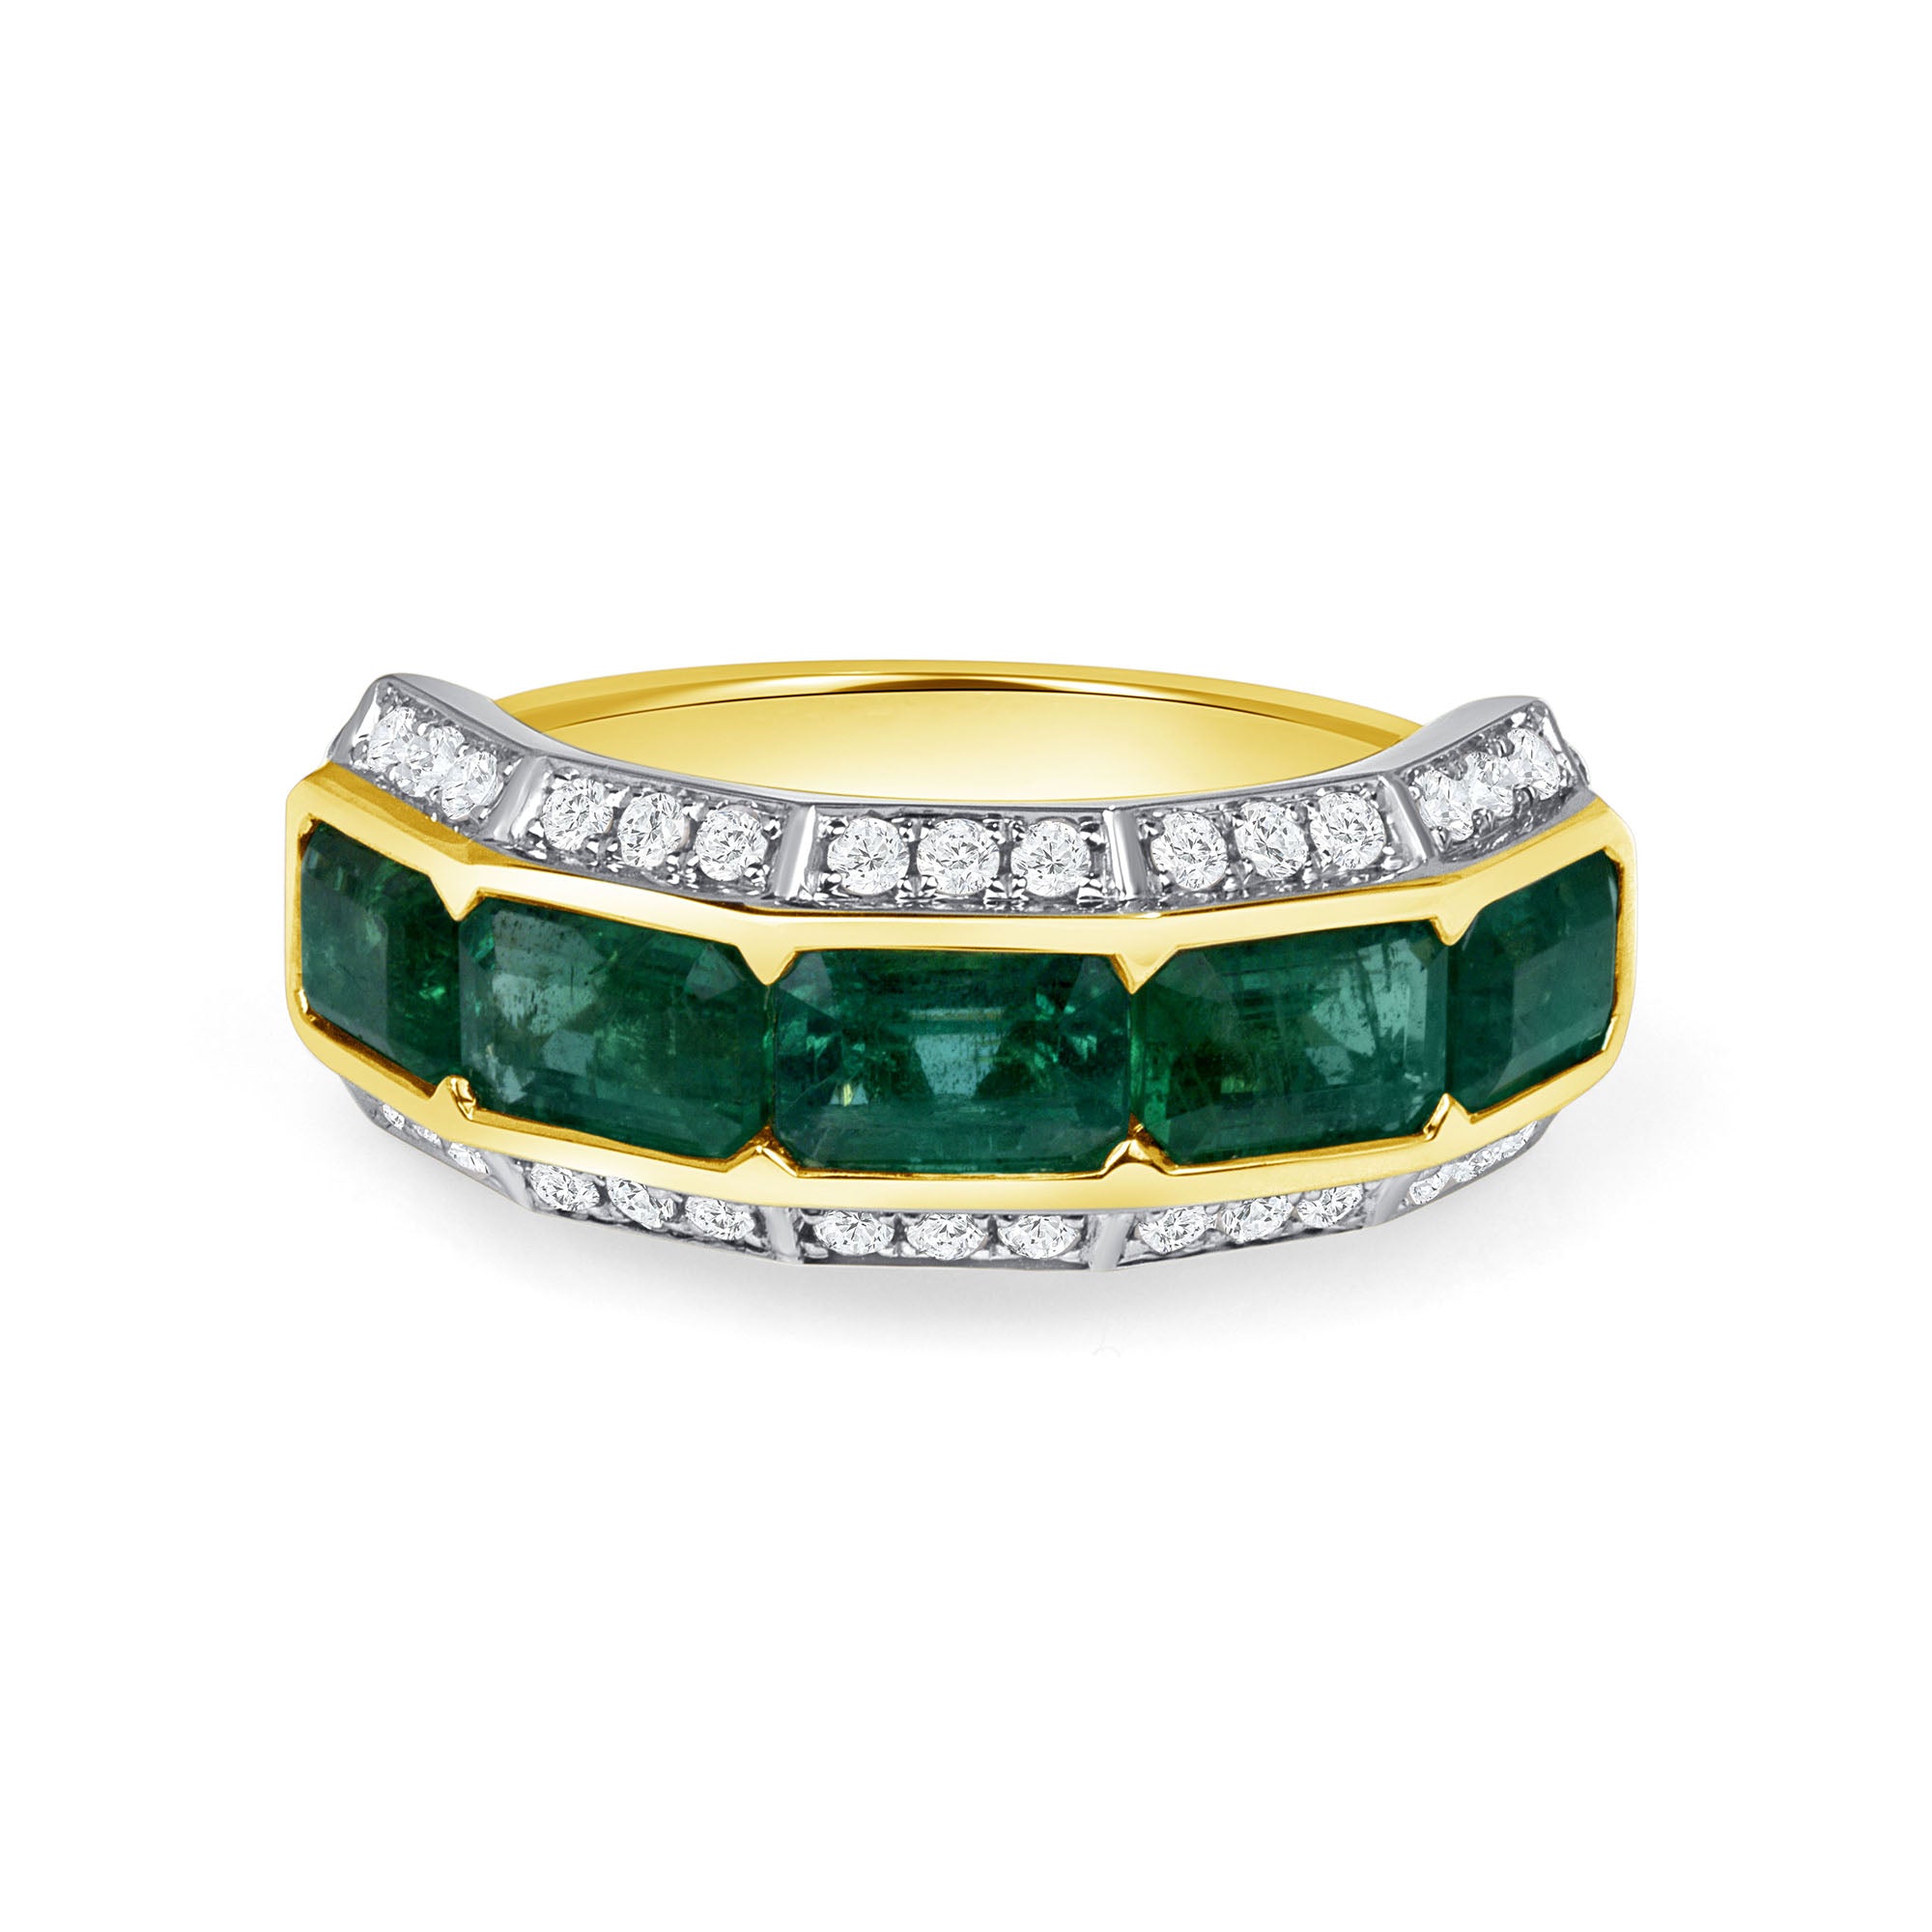 Emerald and Diamond Layered Channel Set Ring in 14K Yellow Gold